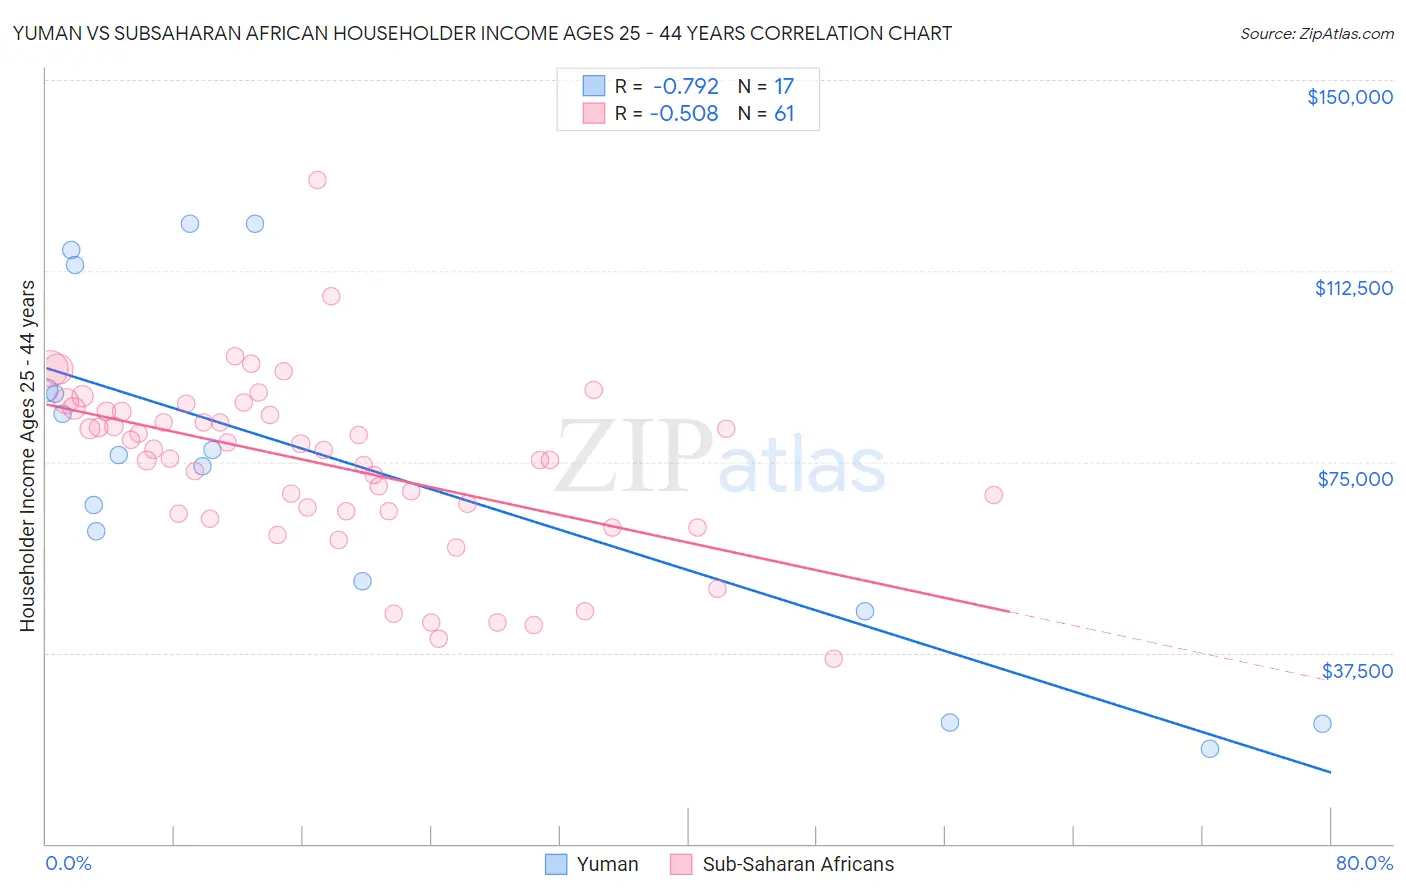 Yuman vs Subsaharan African Householder Income Ages 25 - 44 years